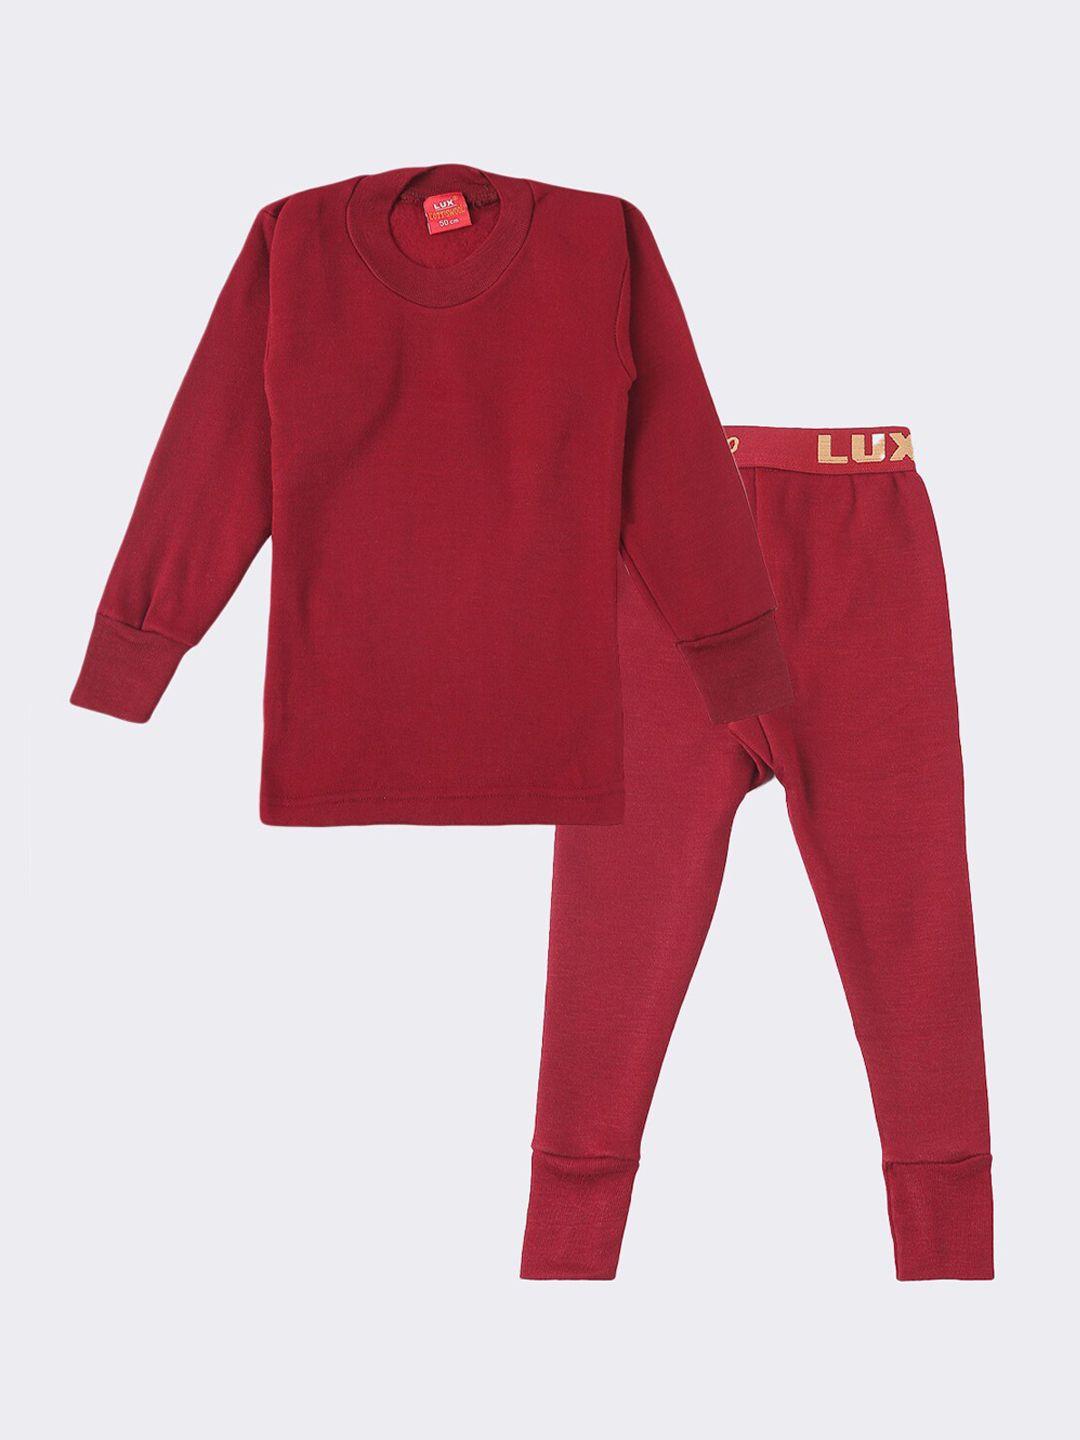 lux cottswool boys maroon red solid cotton thermal set